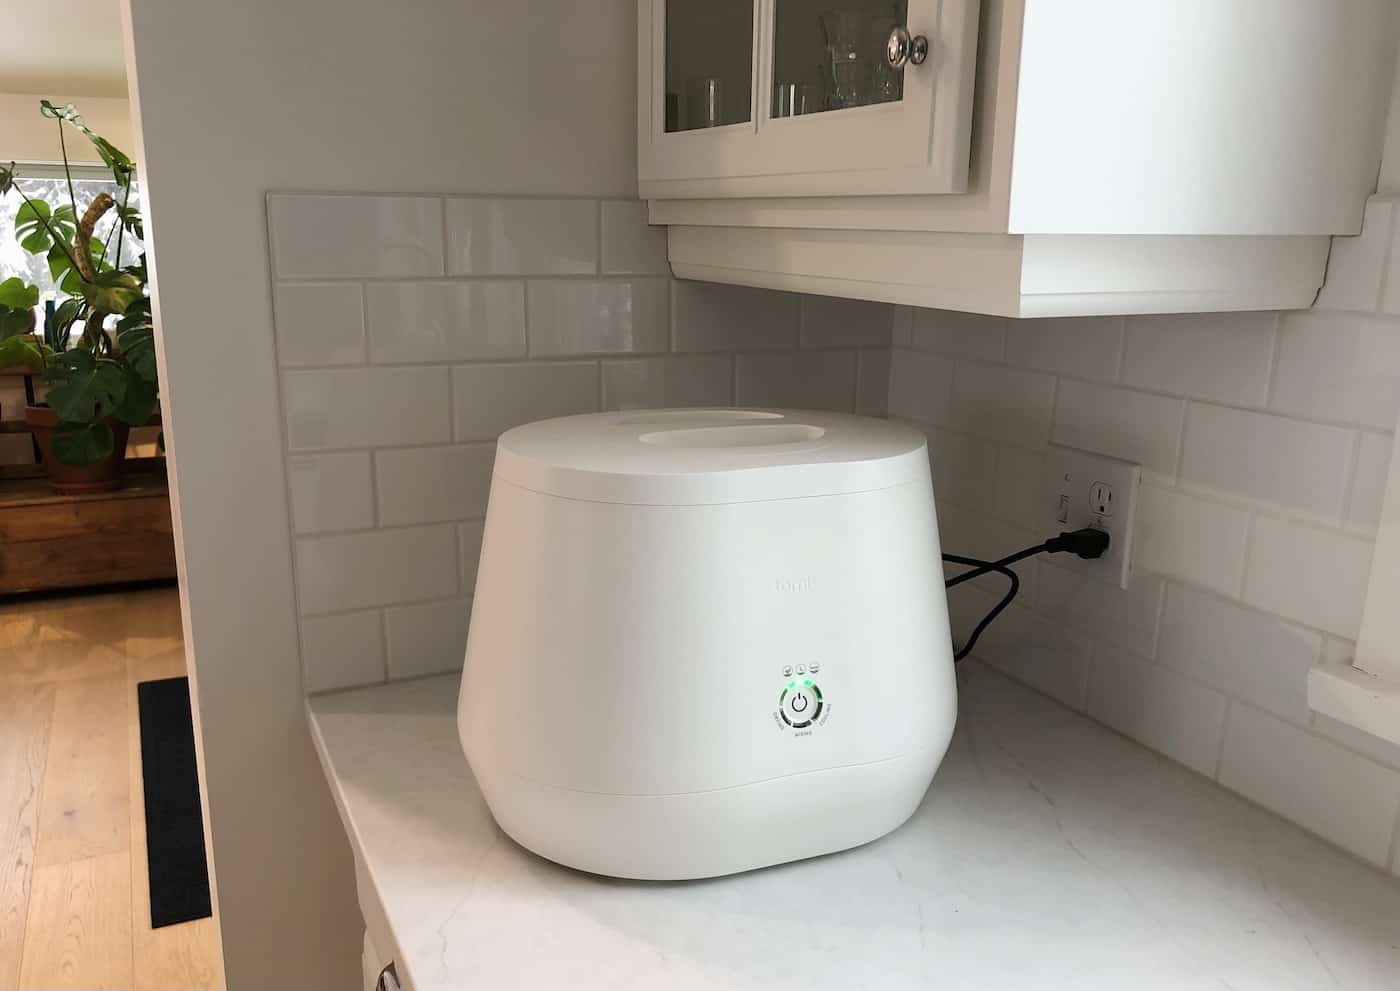 Lomi review - home composter in the kitchen